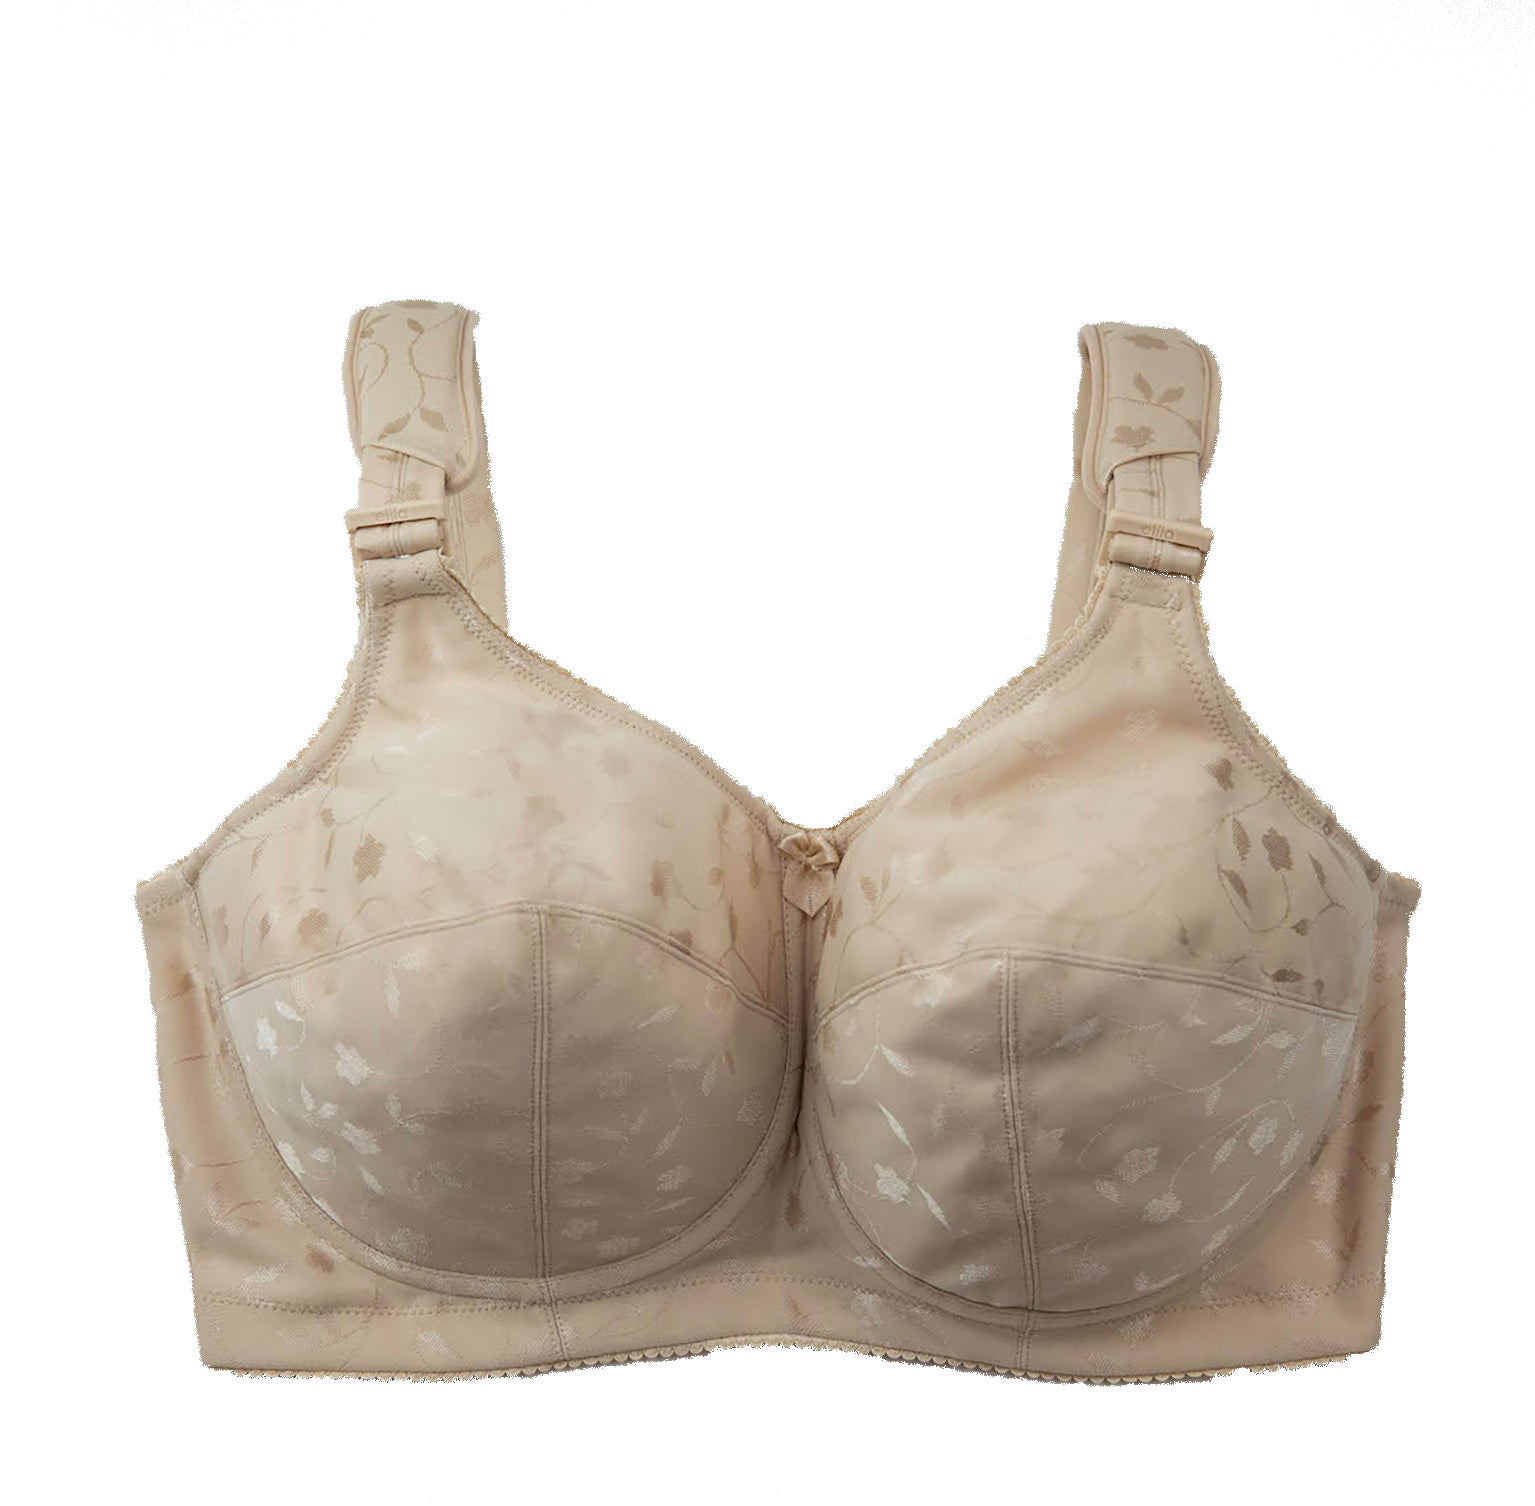 Elila GREY Full Coverage Stretch Isabella Lace Underwire Bra US 38K UK 38H  for sale online